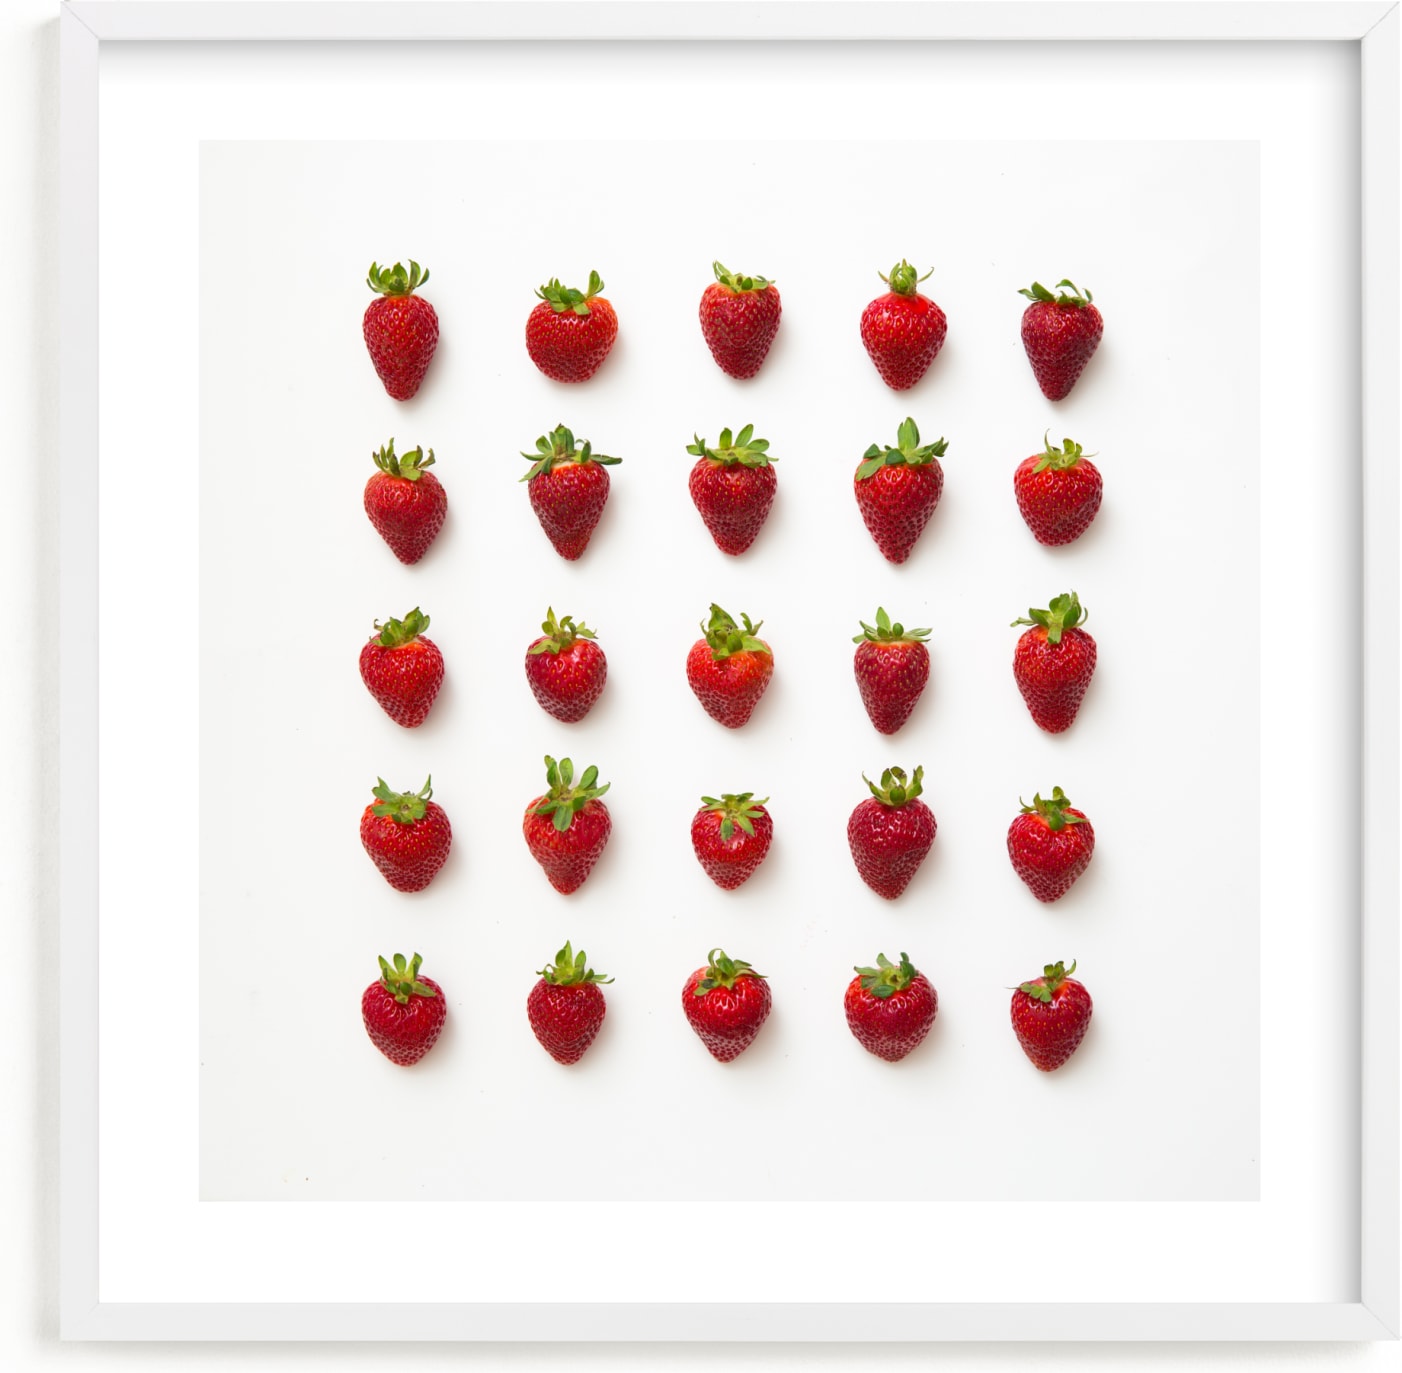 This is a white kids wall art by Heather Deffense called Strawberries.